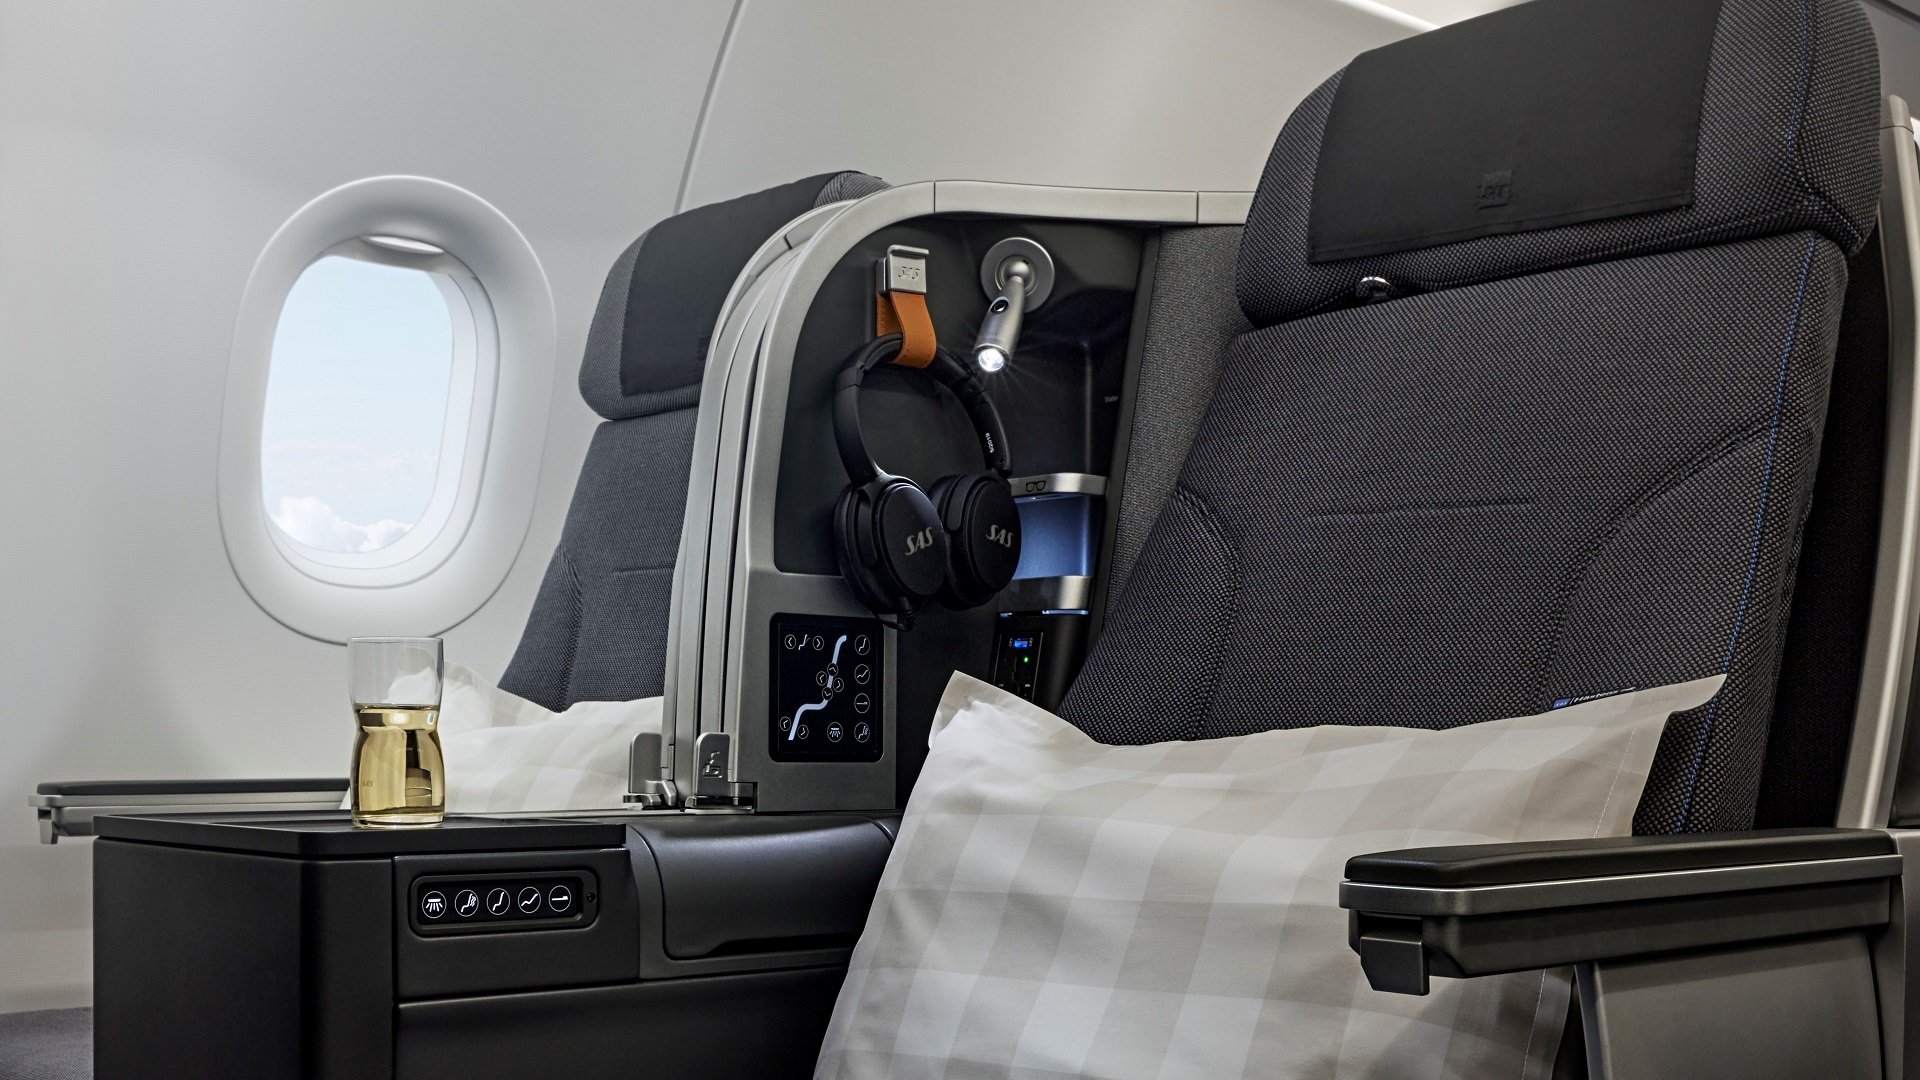 SAS rolls out its new A321LR Business Class cabin